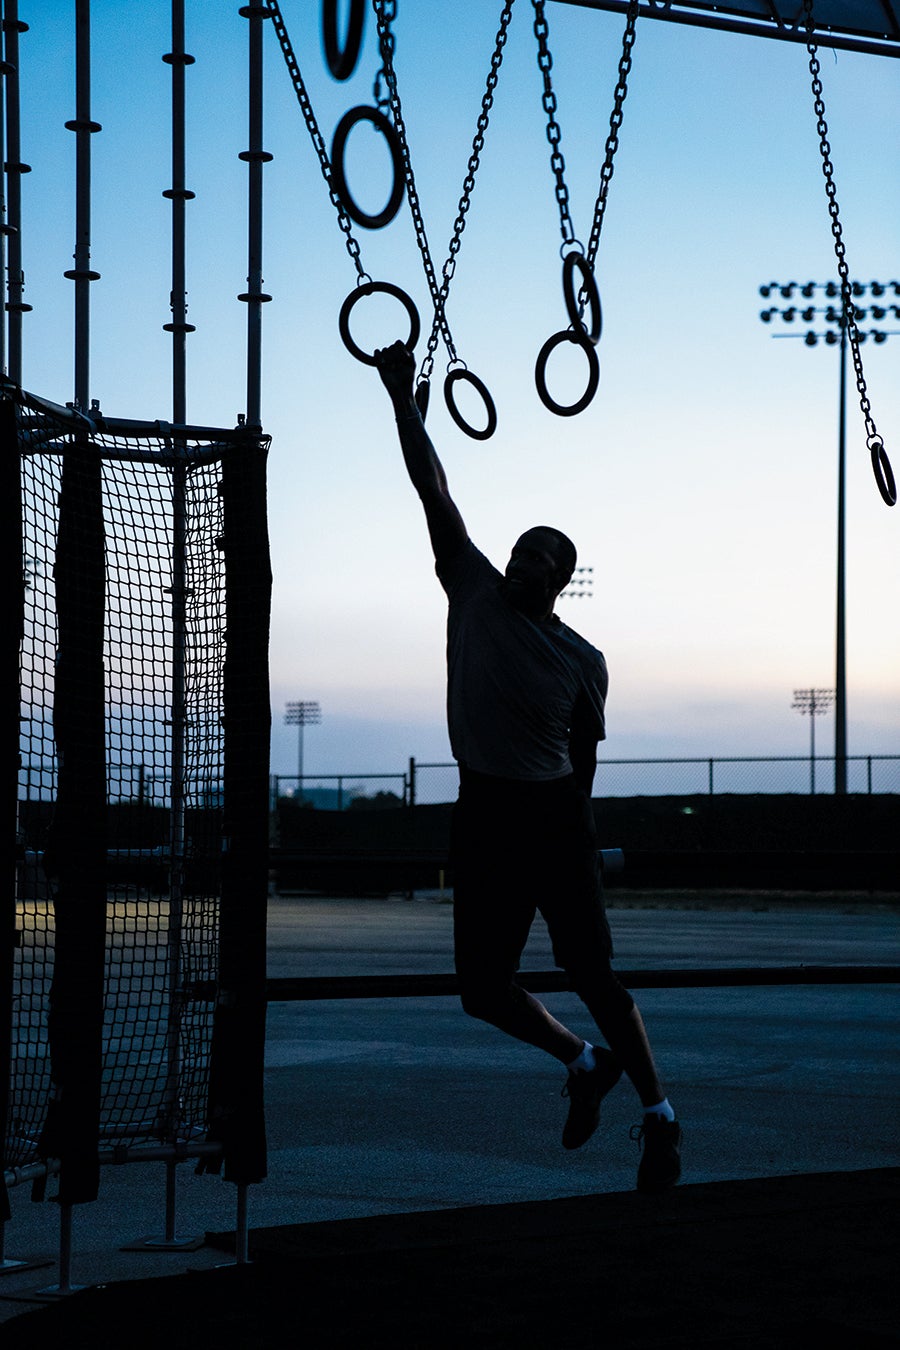 A soldier swings across an obstacle course during U.S. Army North’s Wellness Rodeo in San Antonio. (Credit: U.S. Army/Spc. Noelani Revina)